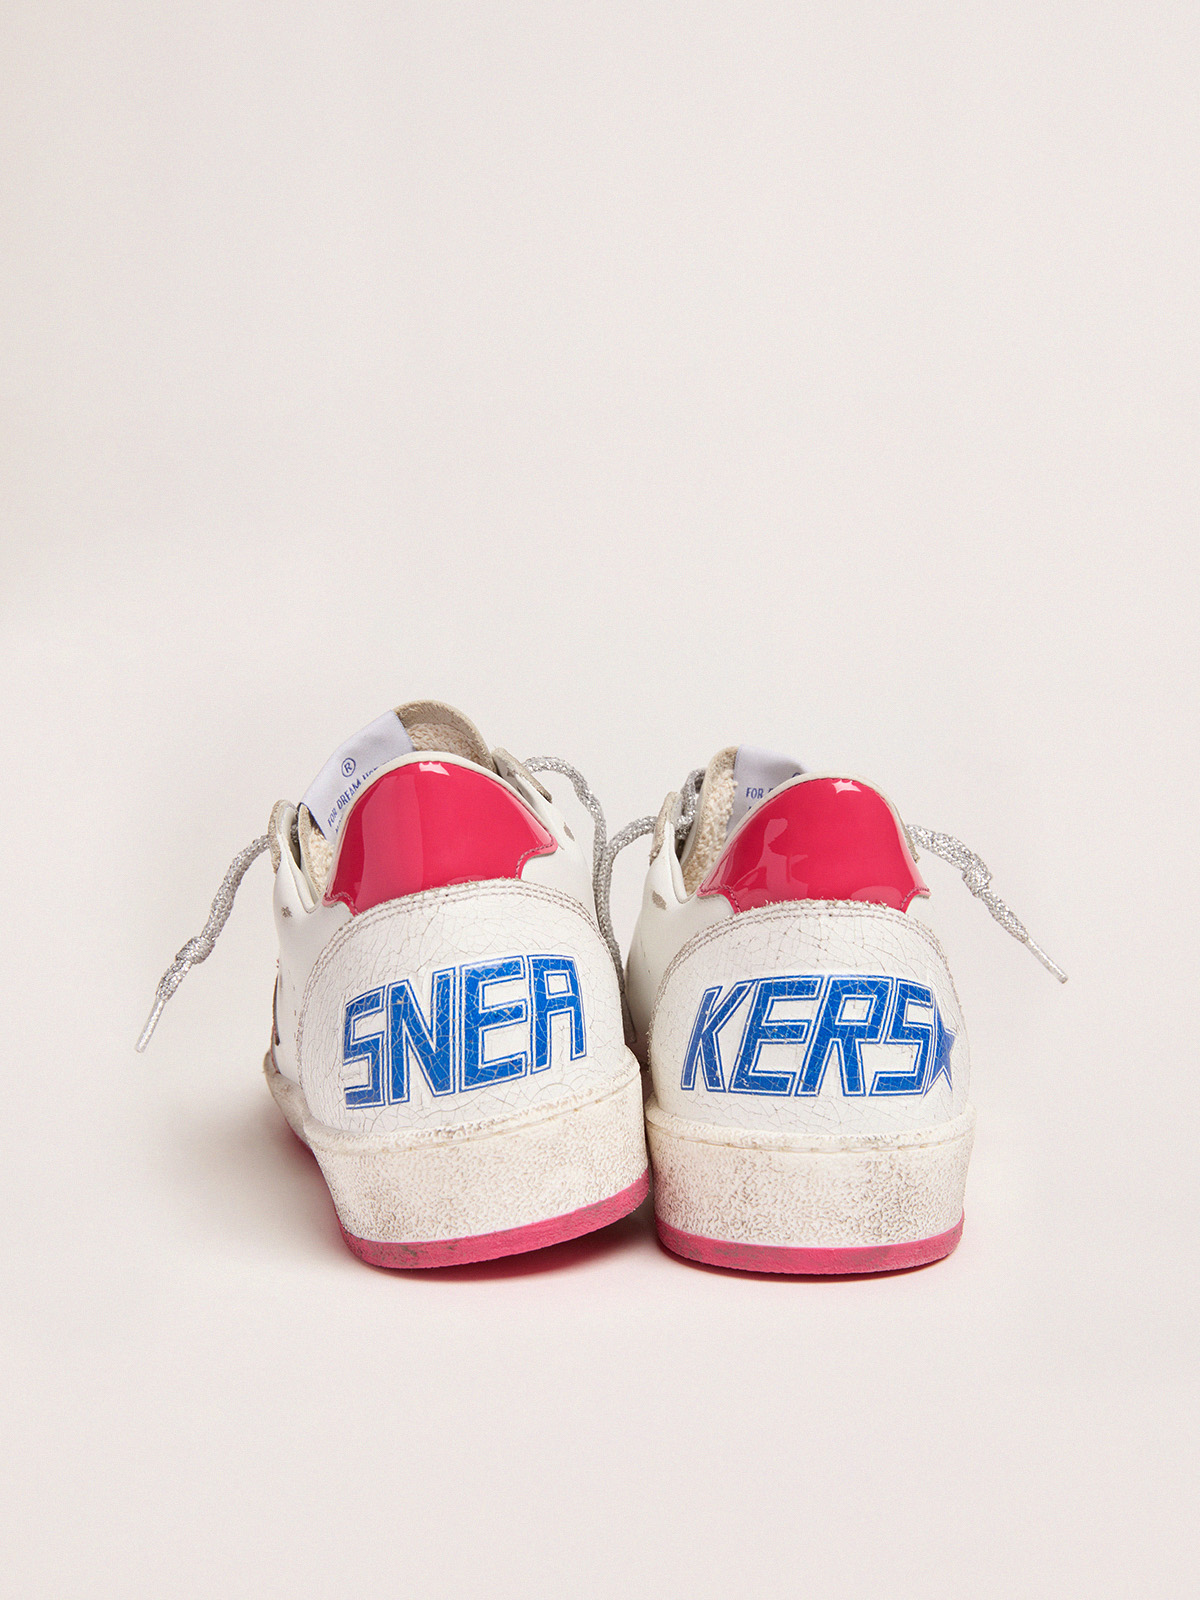 Ball Star LTD sneakers in white leather with red patent leather detail |  Golden Goose